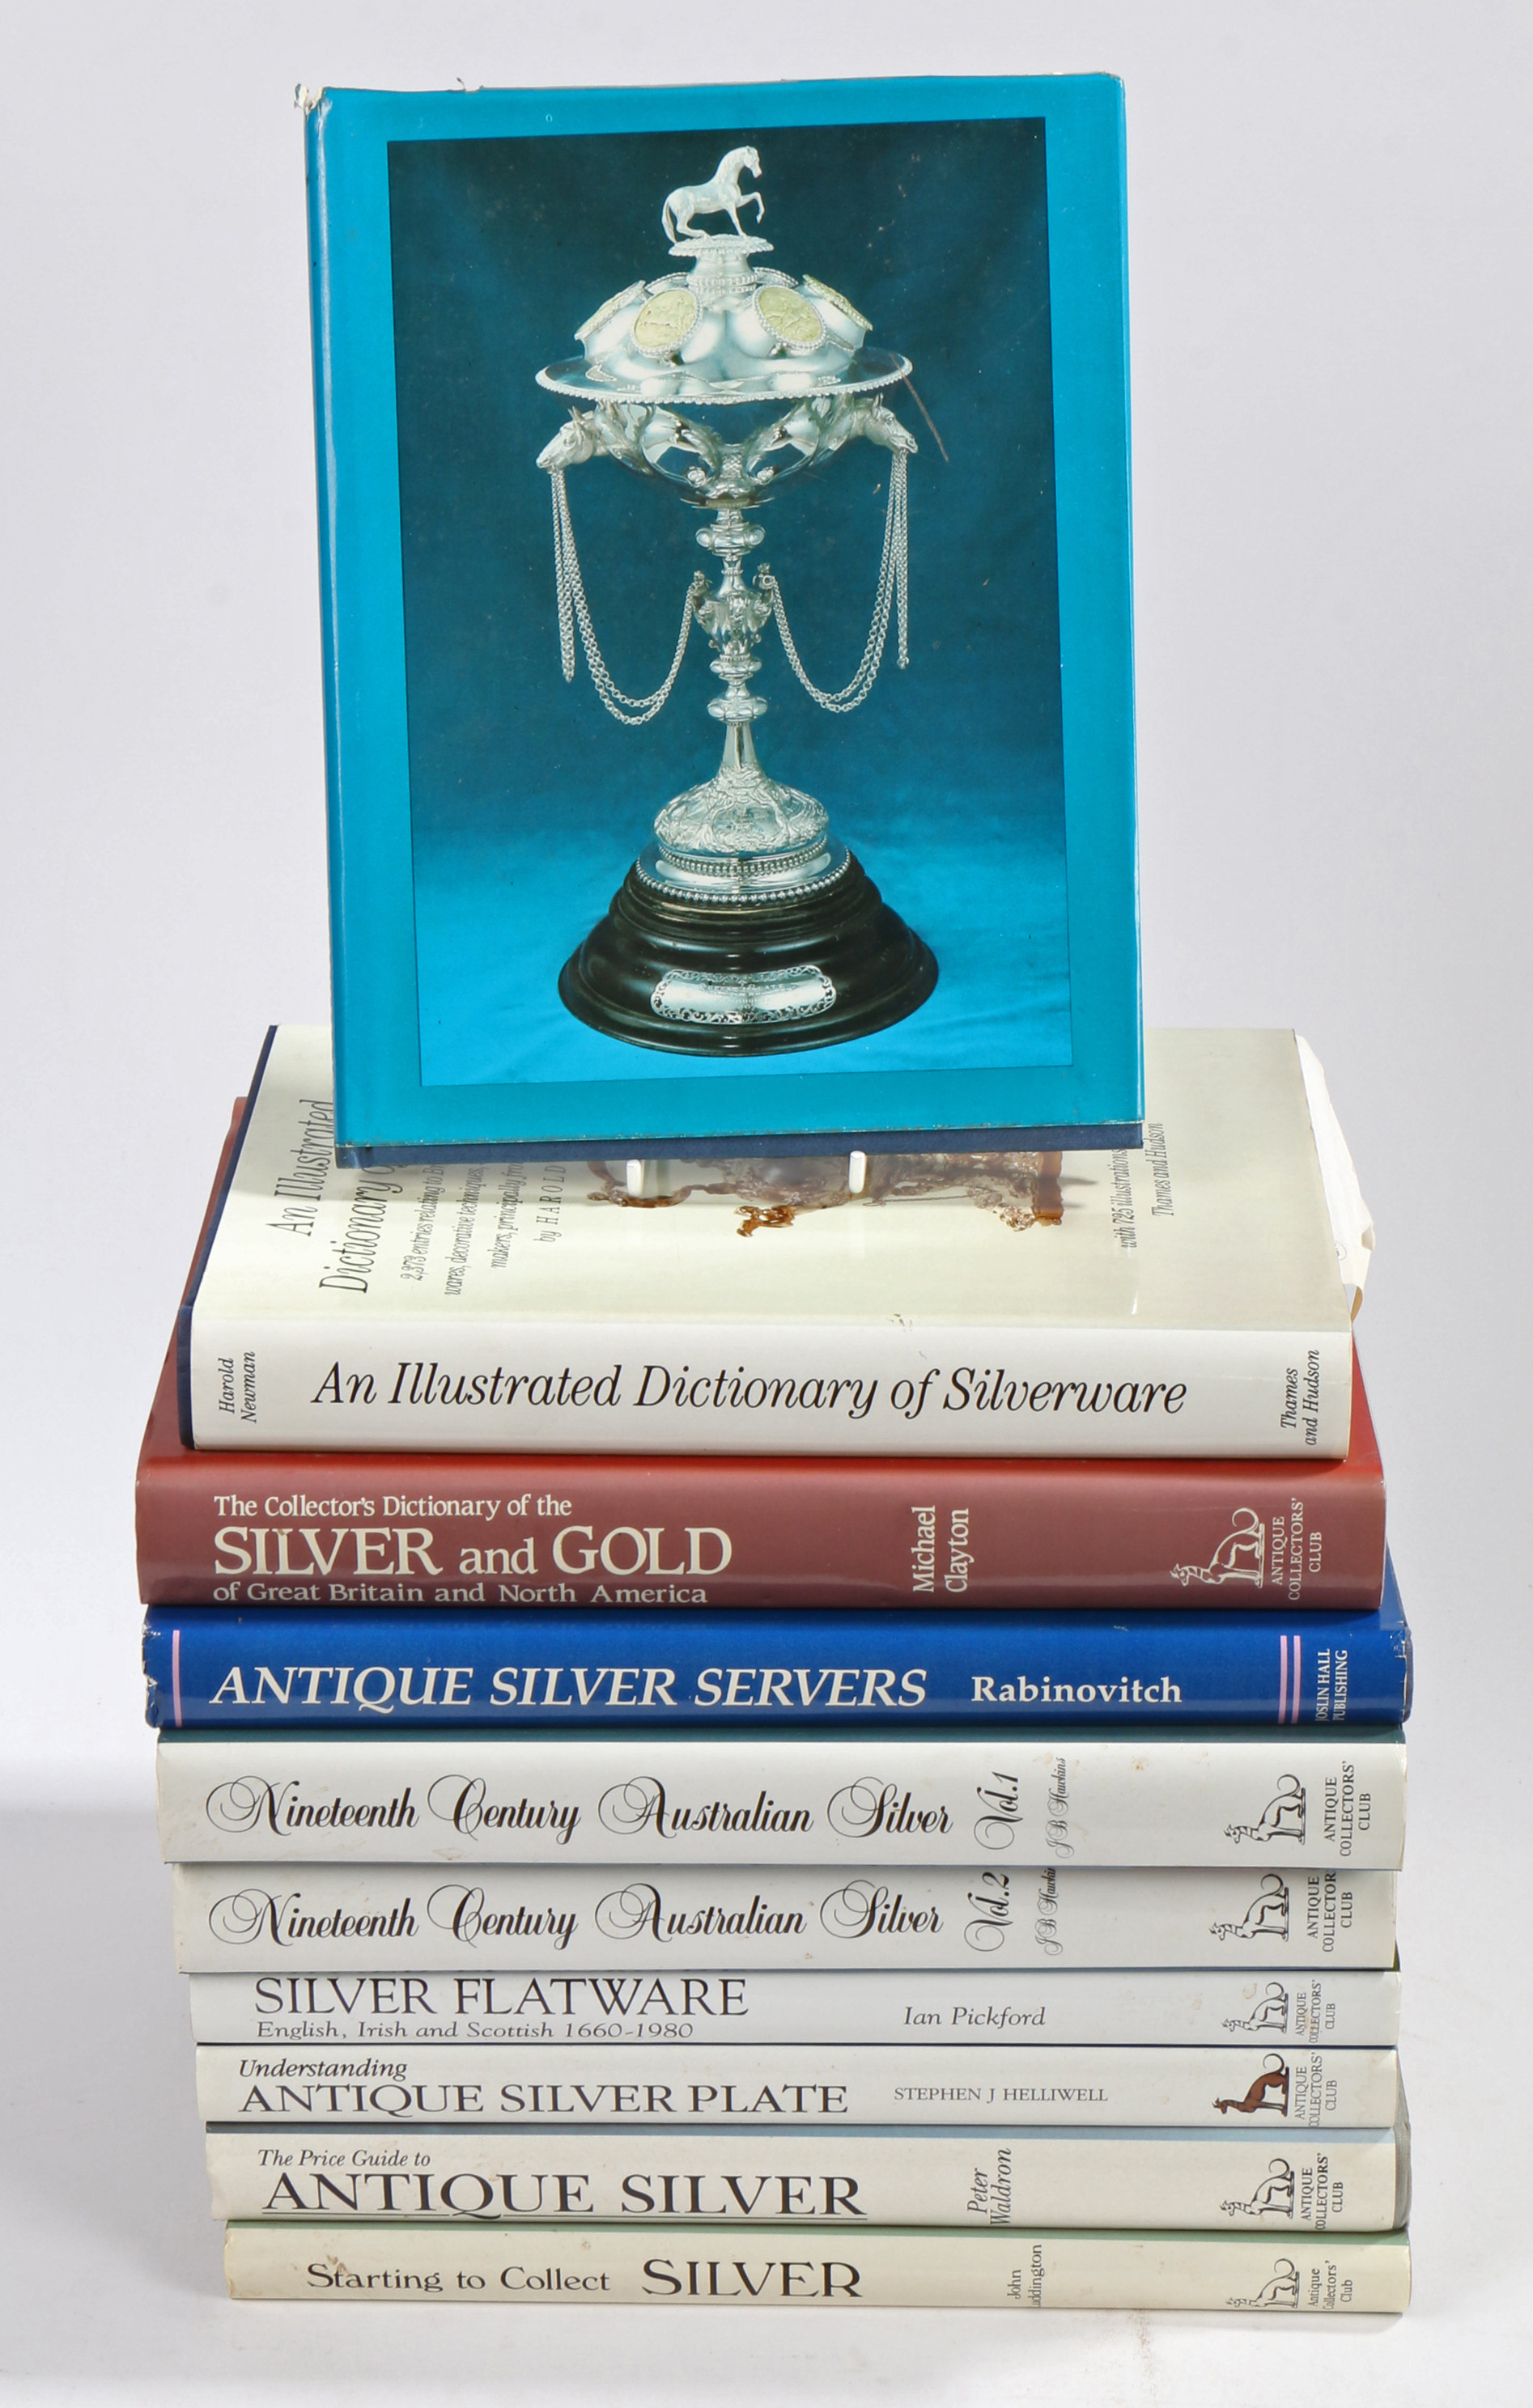 A collection of silver and gold reference books, Rabinovitch, Antique Silver Servers, Harold Newman,